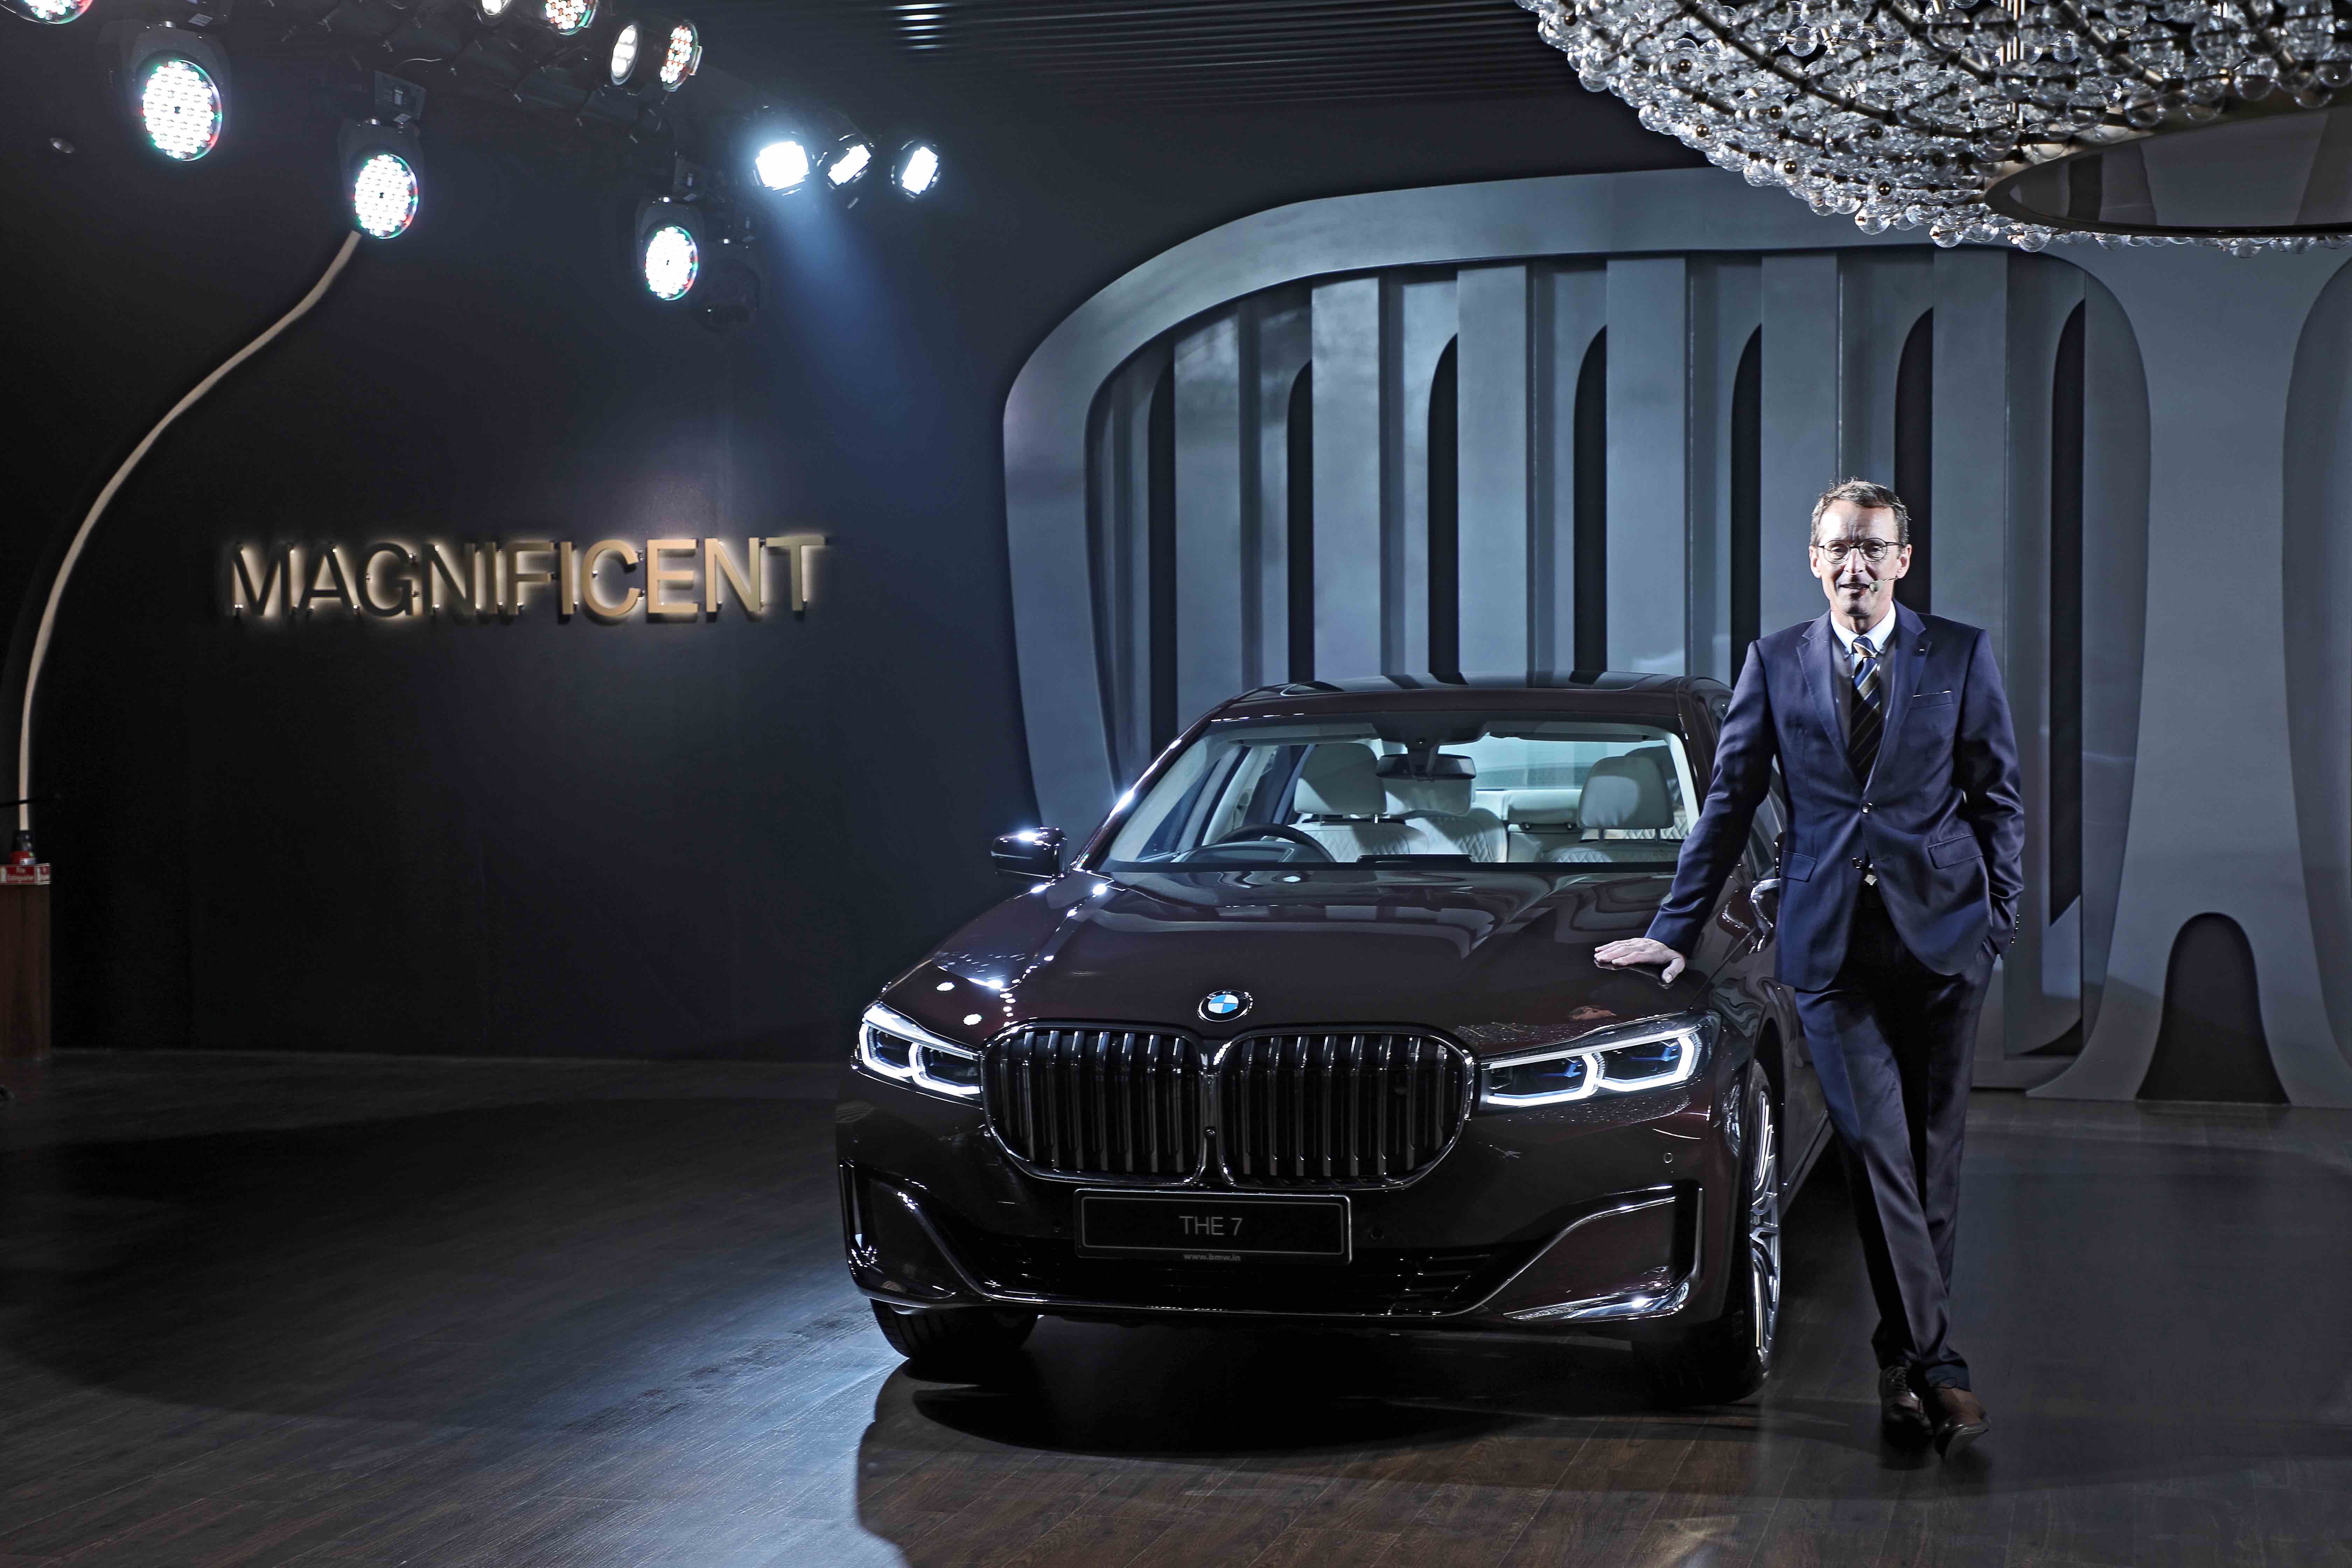 2019 BMW 7 Series facelift launched. Prices start at Rs. 1.22 crore